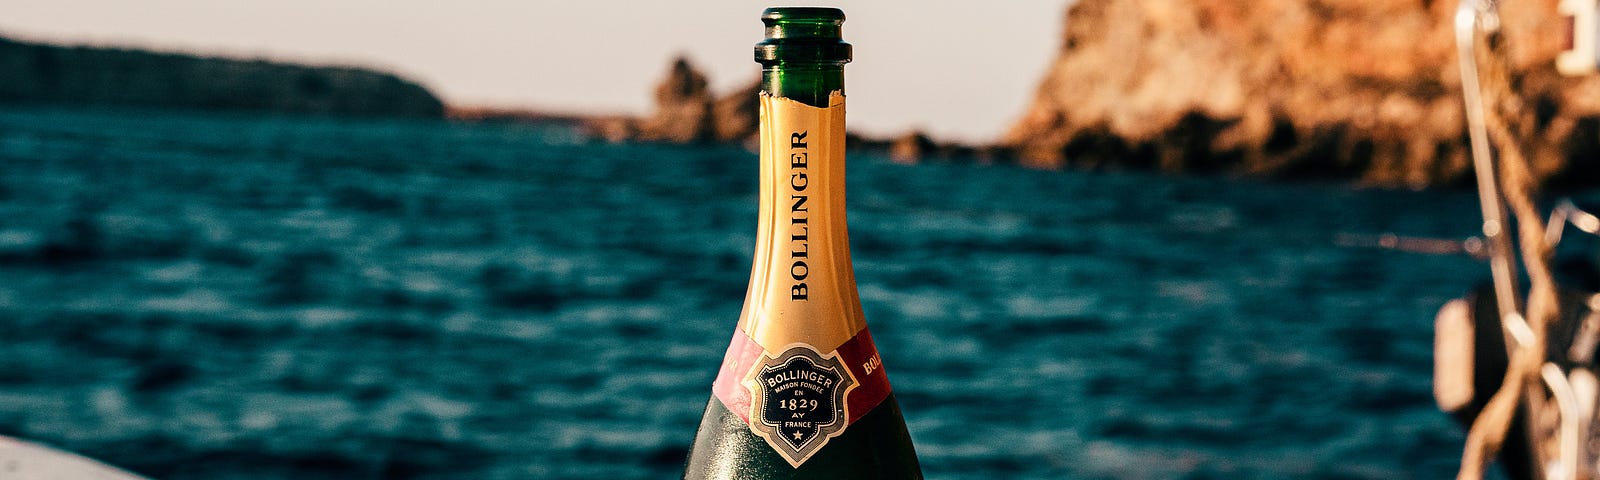 A bottle of Bollinger champagne on a boat. Photo by Sebastian Coman Photography : https://www.pexels.com/photo/bollinger-wine-bottle-on-boat-3461205/